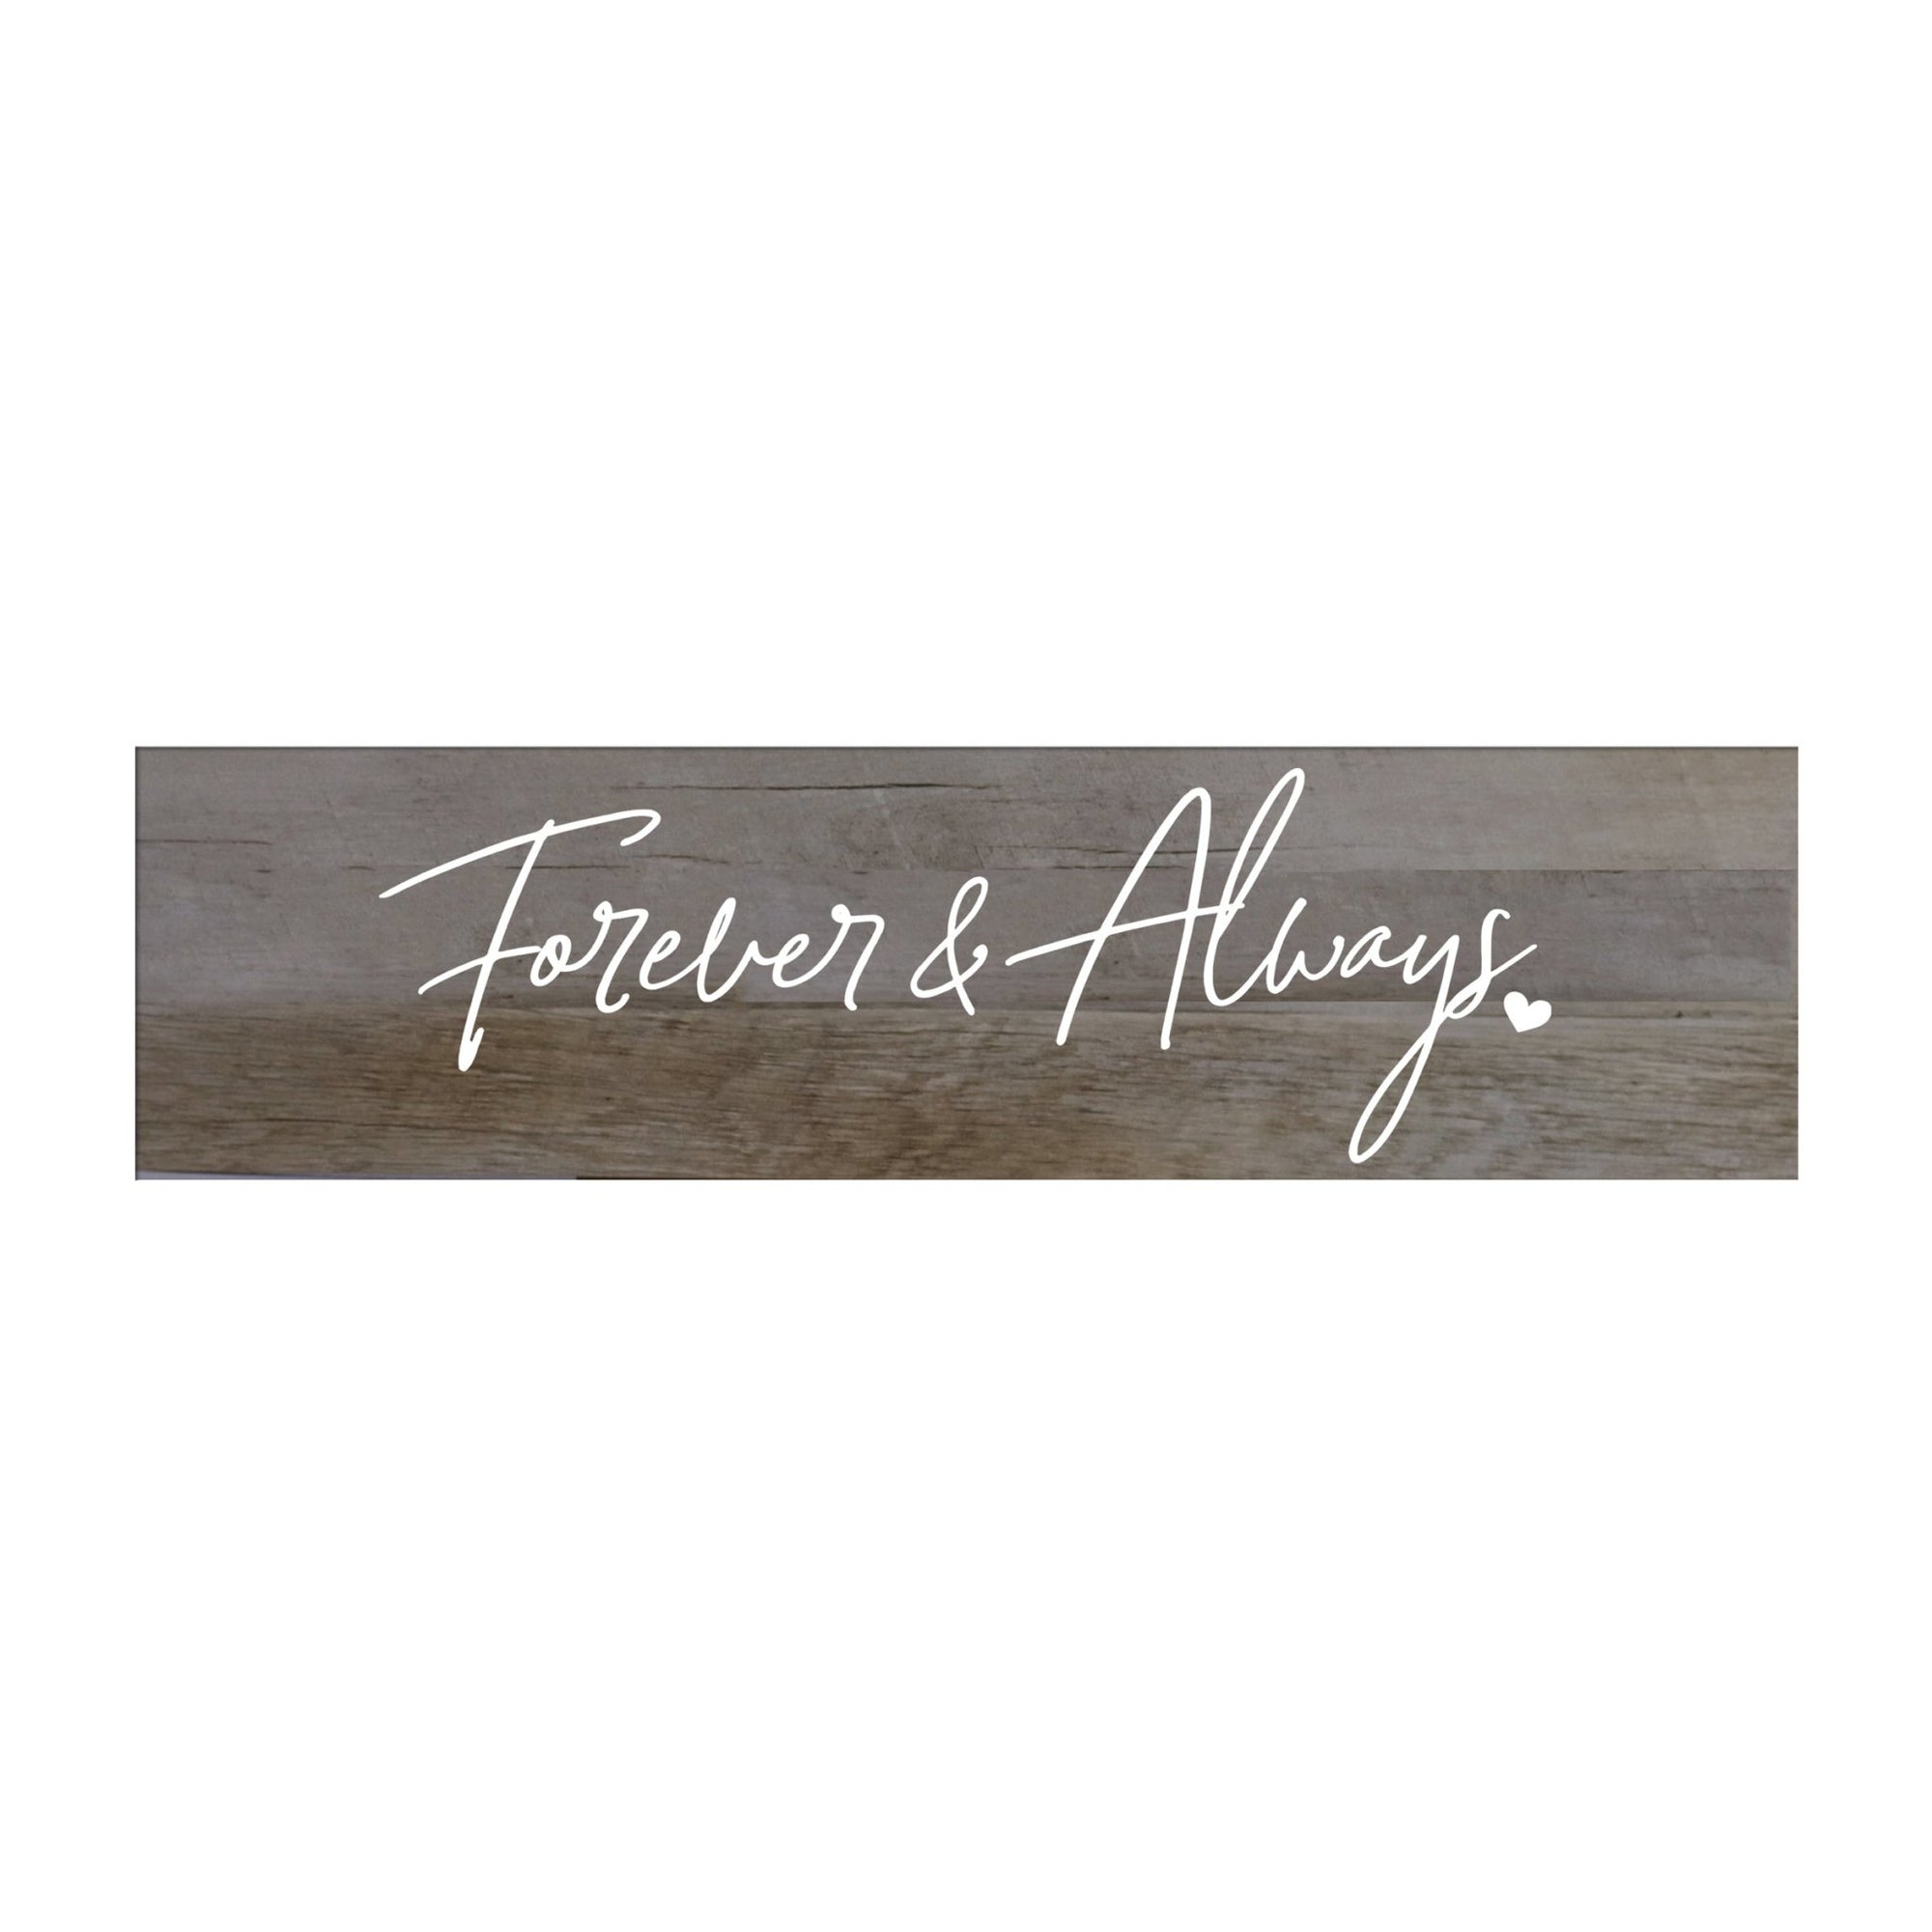 Inspirational Everyday Home and Family Wooden Wall Art Hanging Plaque 10 x 40 – Forever & Always - LifeSong Milestones